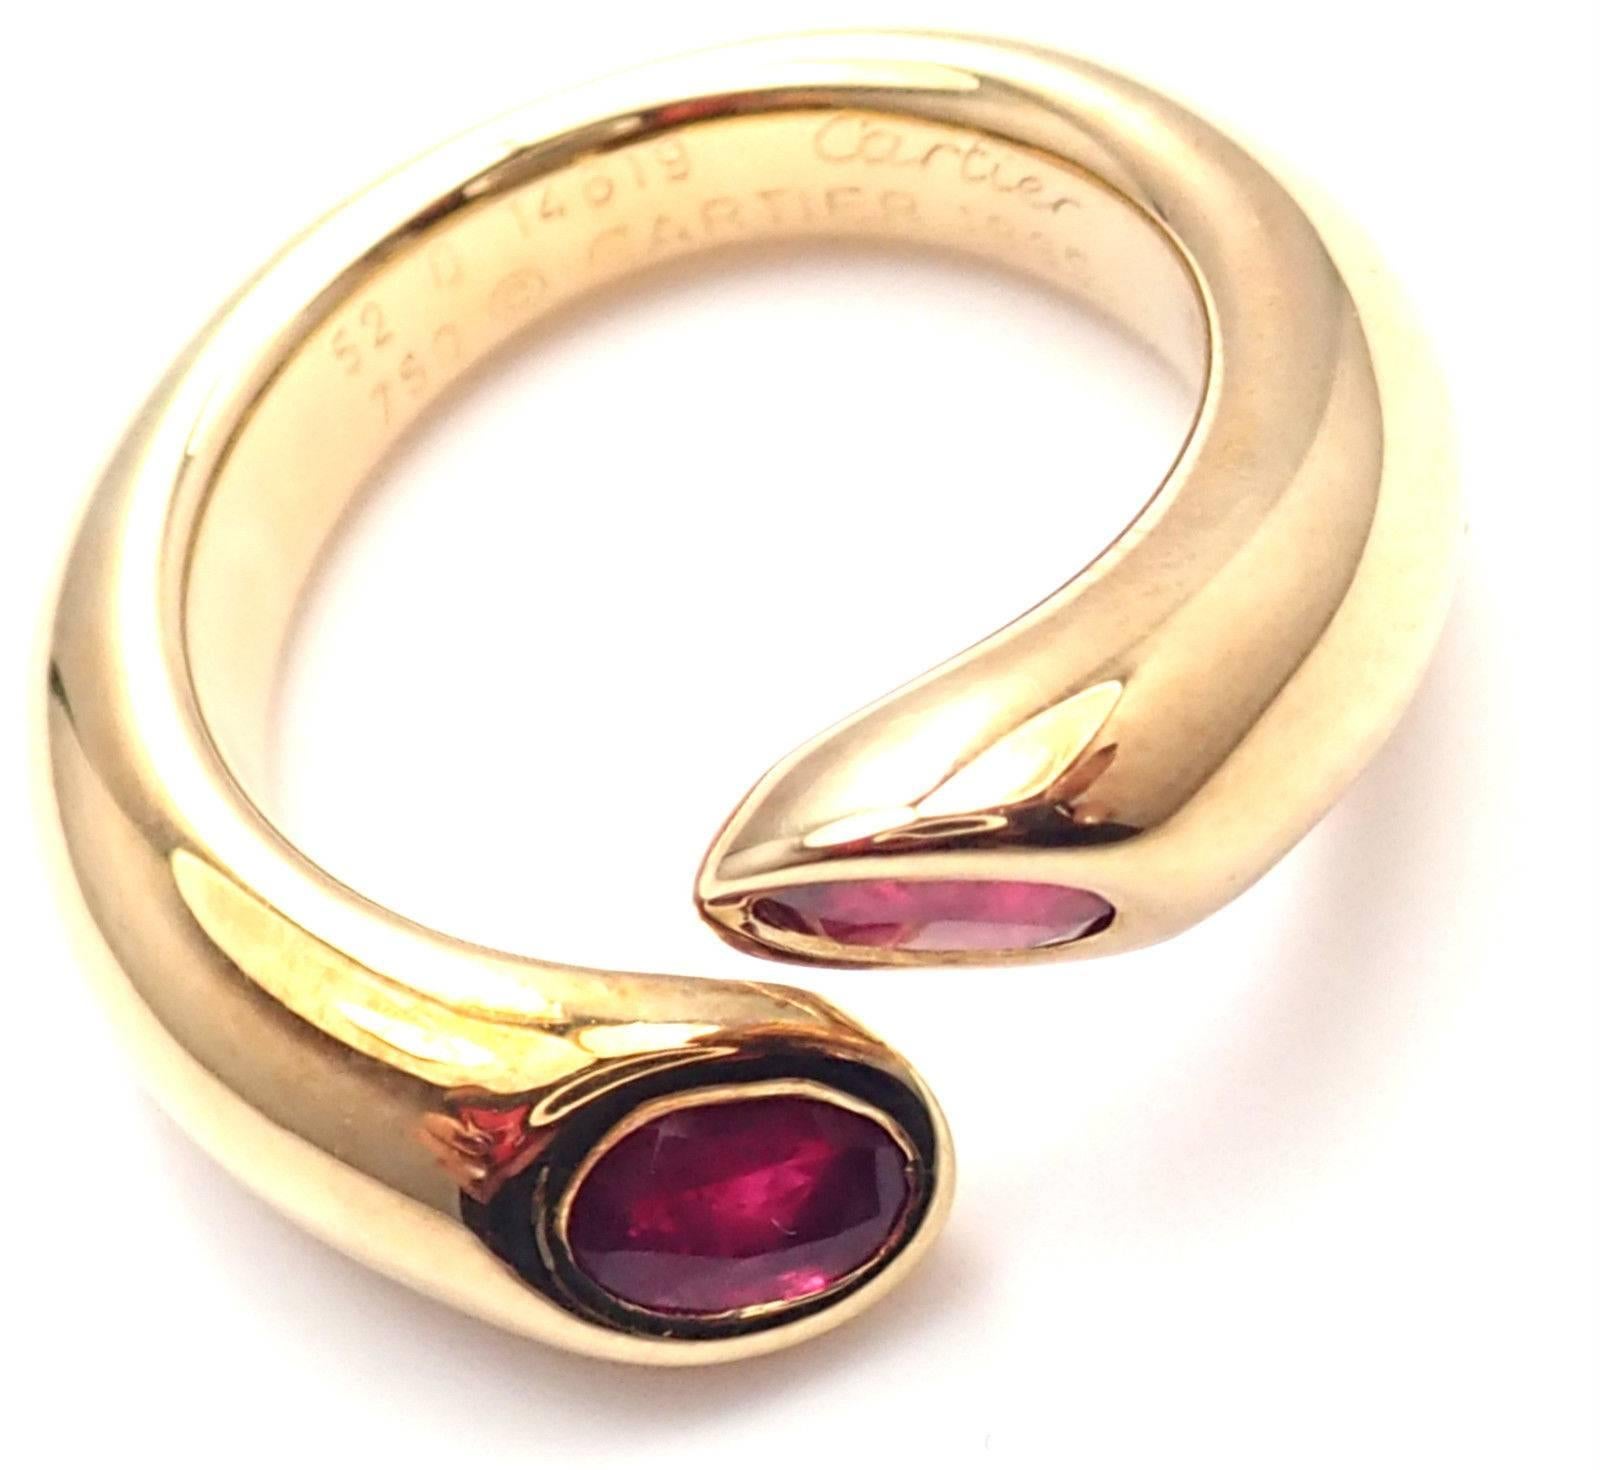 Cartier Ruby Ellipse Deux Tetes Croisees Bypass Yellow Gold Band Ring 3